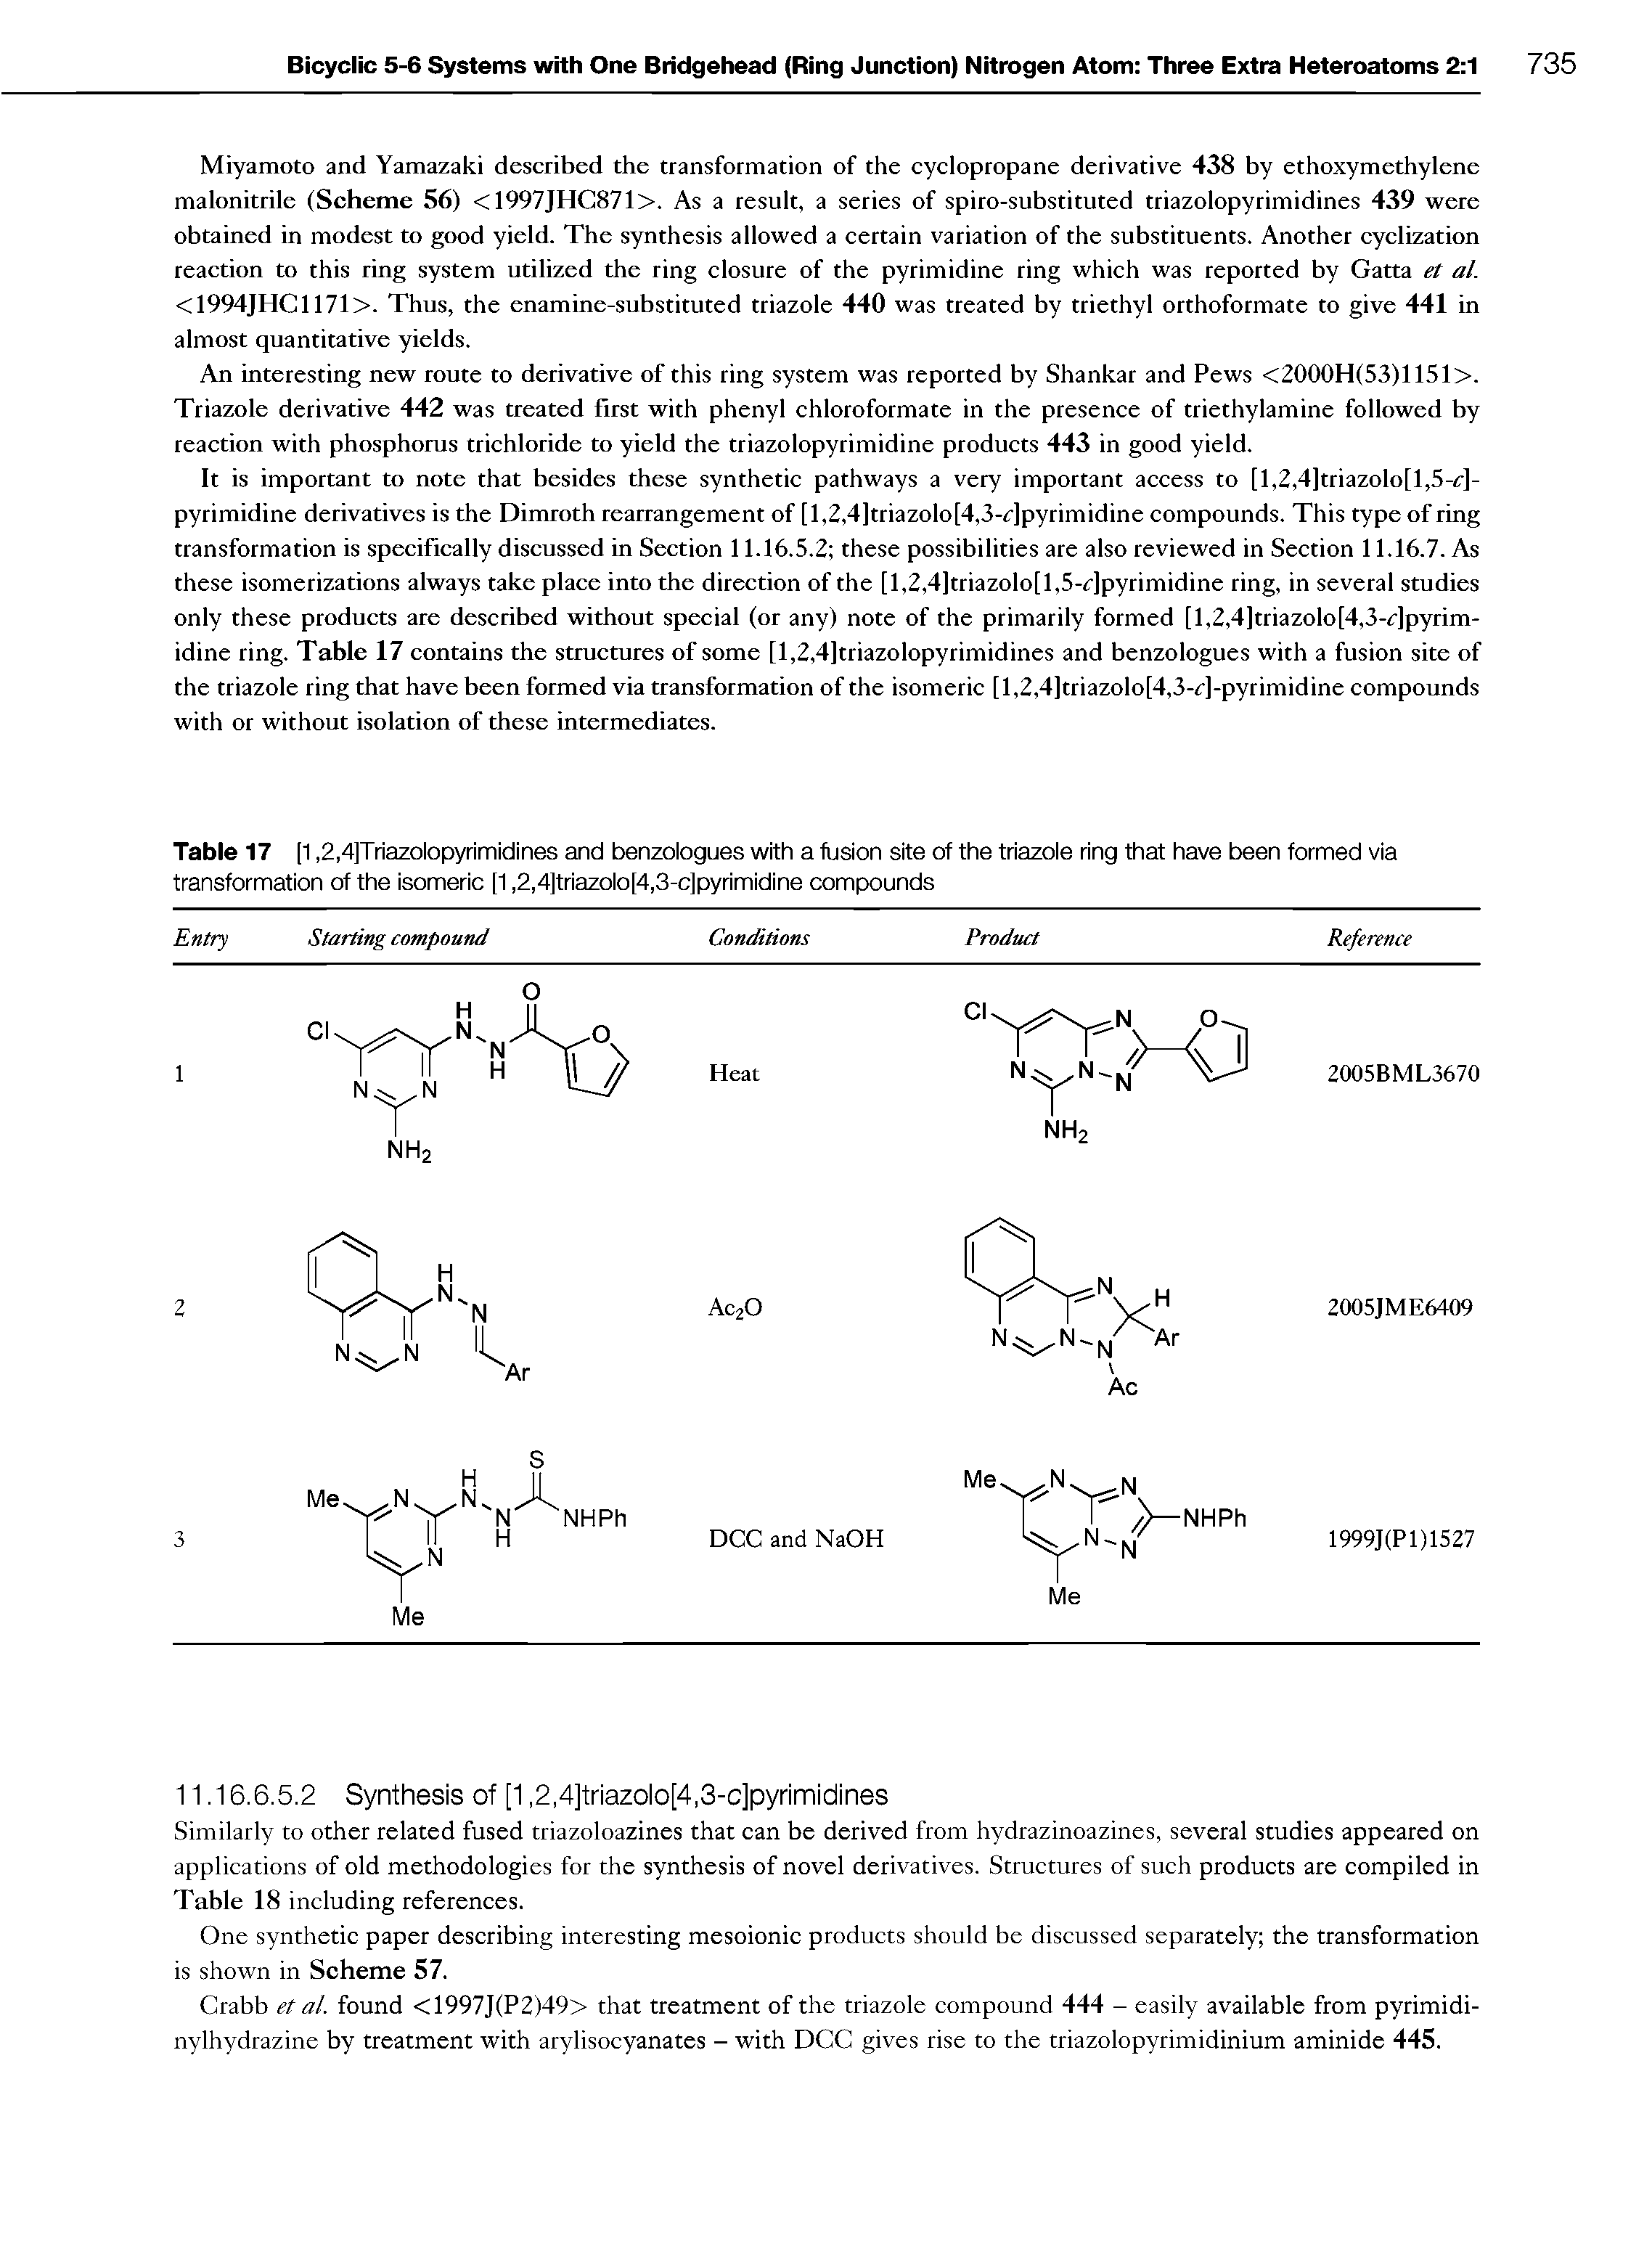 Table 17 [1,2,4]Triazolopyrimidines and benzologues with a fusion site of the triazole ring that have been formed via transformation of the isomeric [1,2,4]triazolo[4,3-c]pyrimidine compounds...